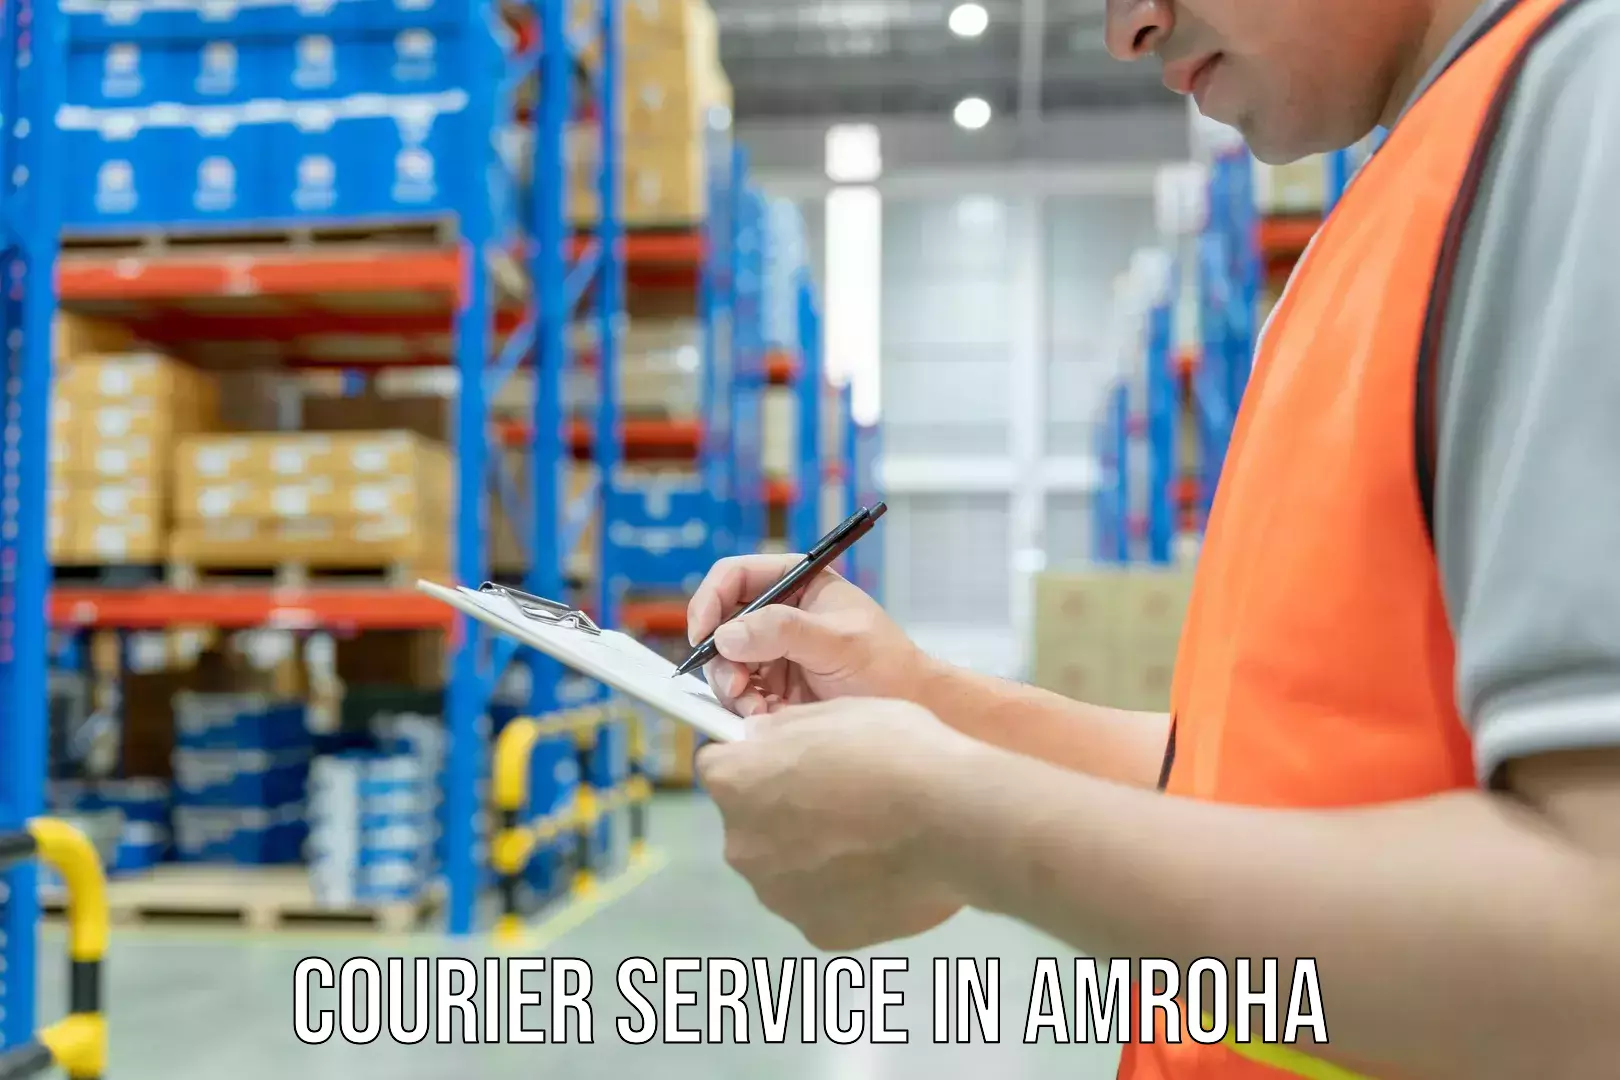 Global courier networks in Amroha